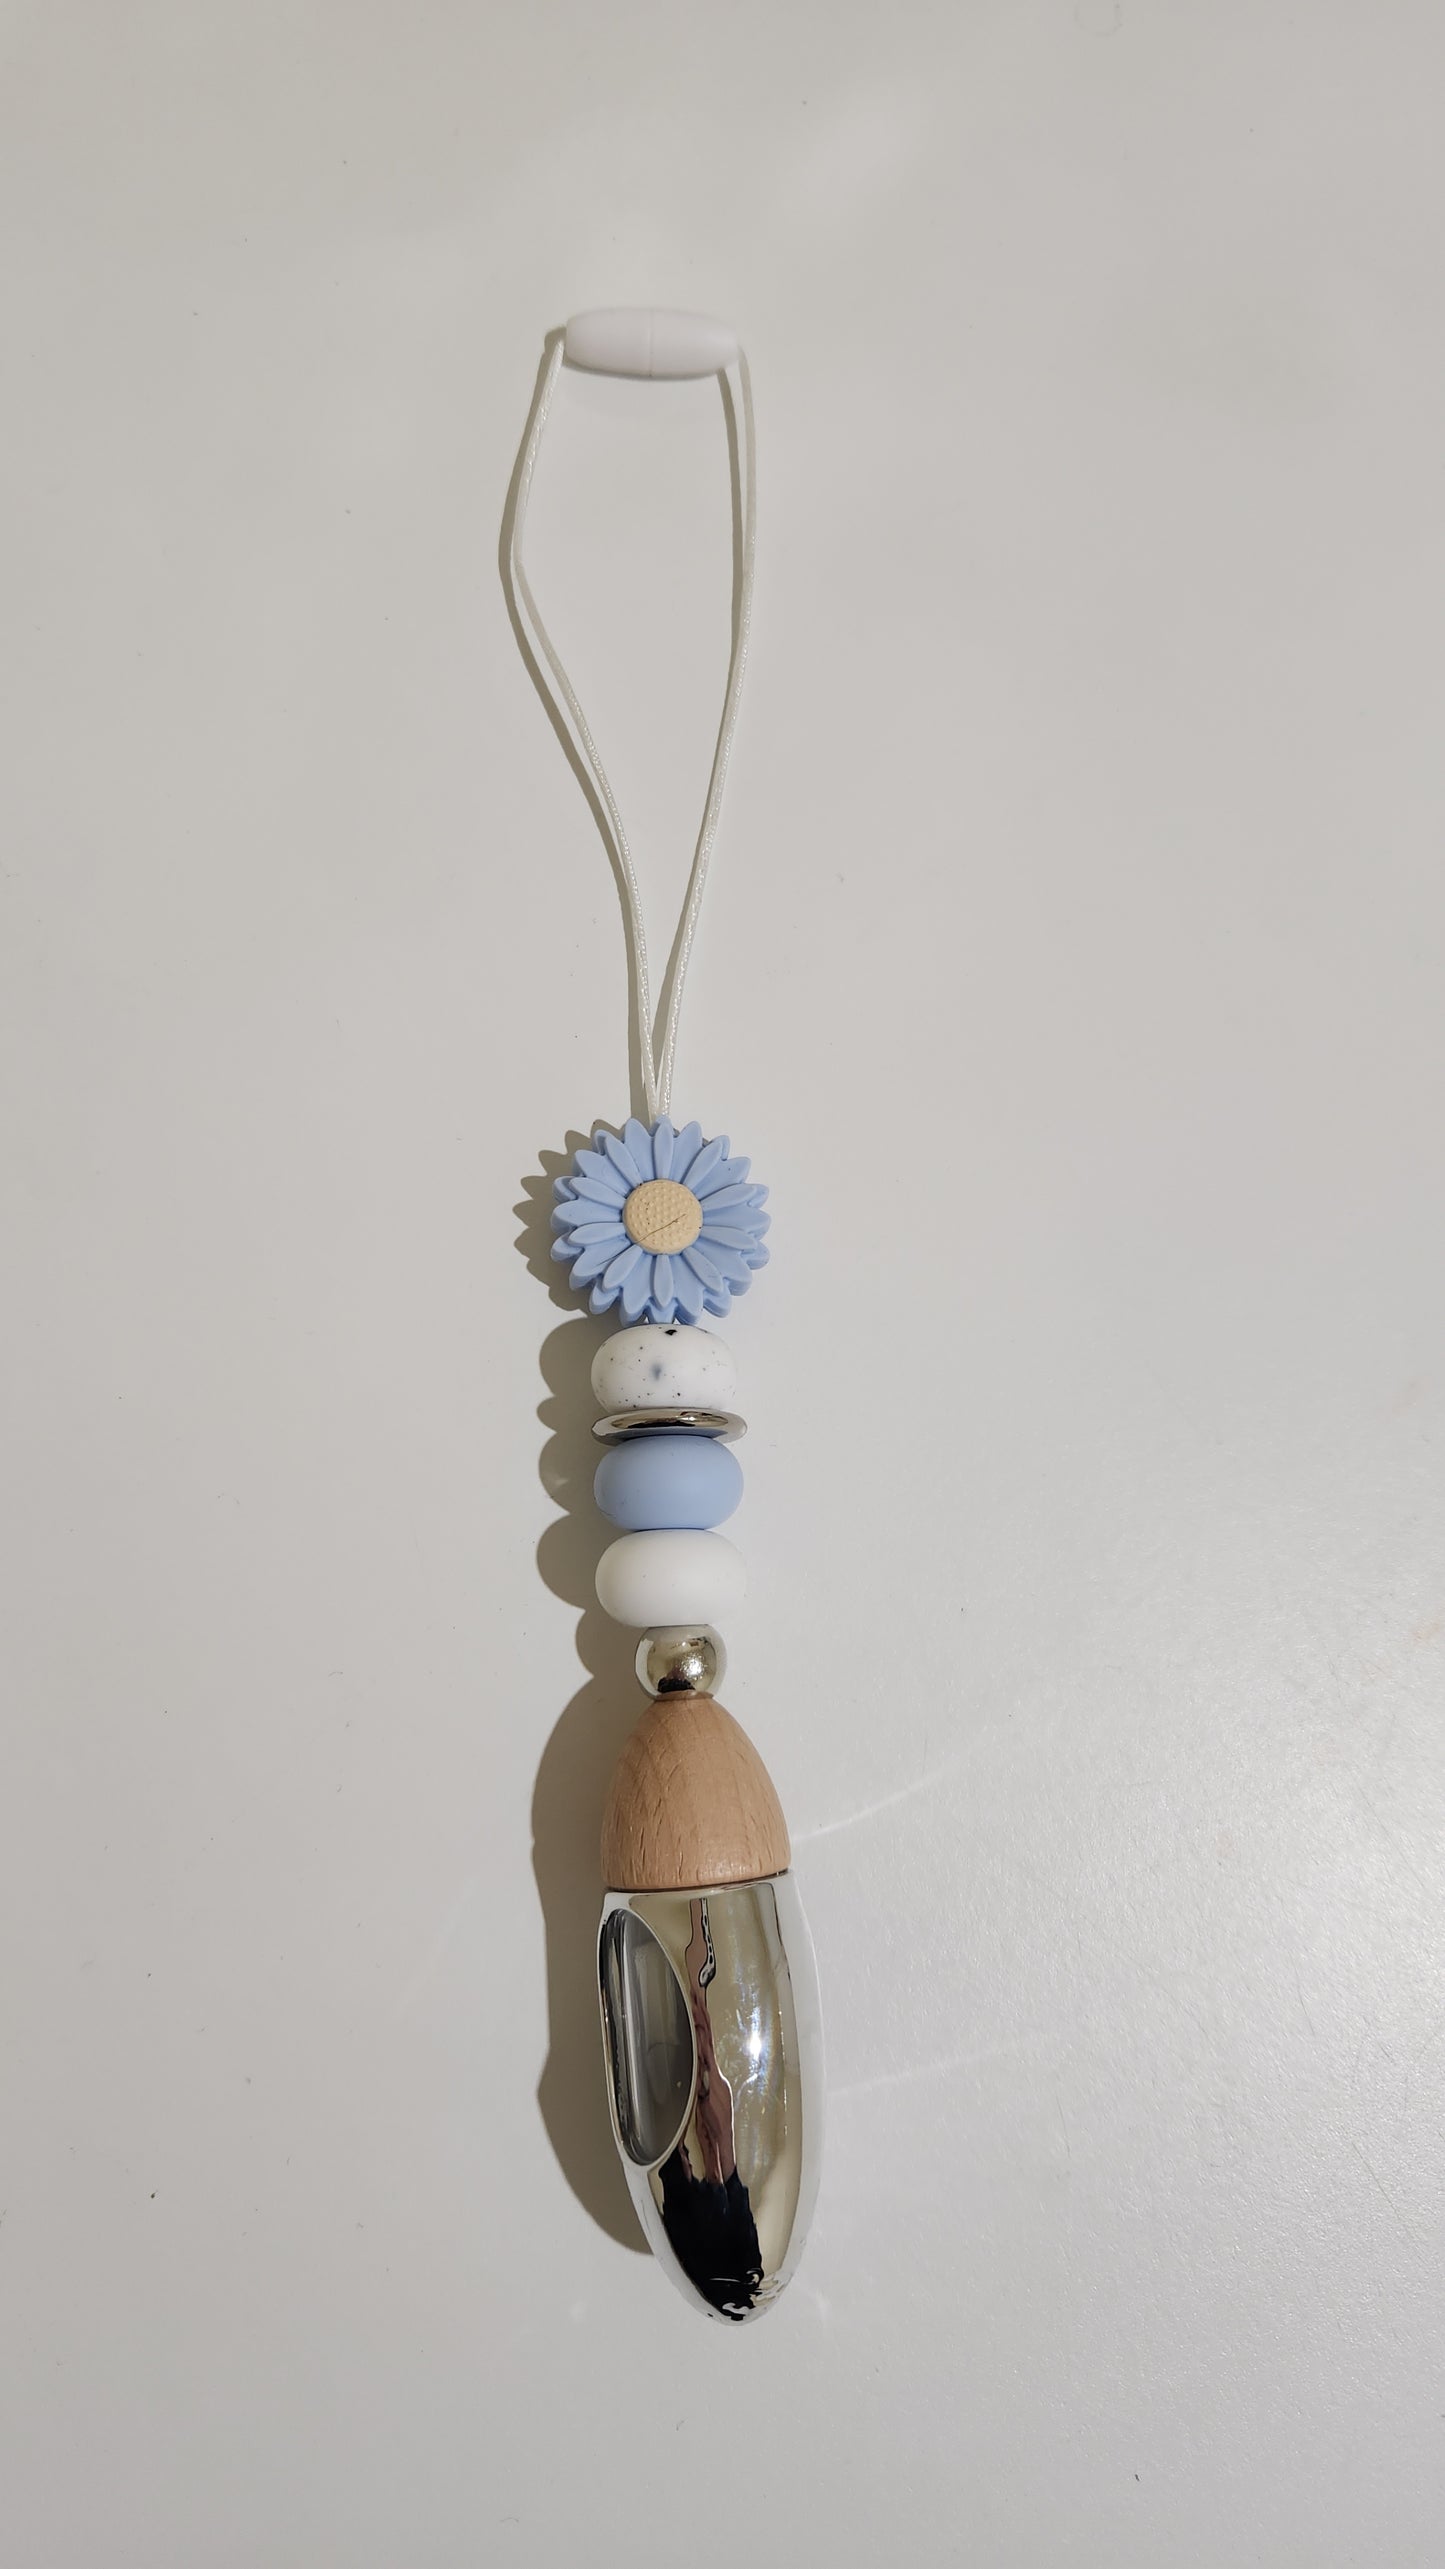 'Baby Blue Daisy' Hanging Diffuser